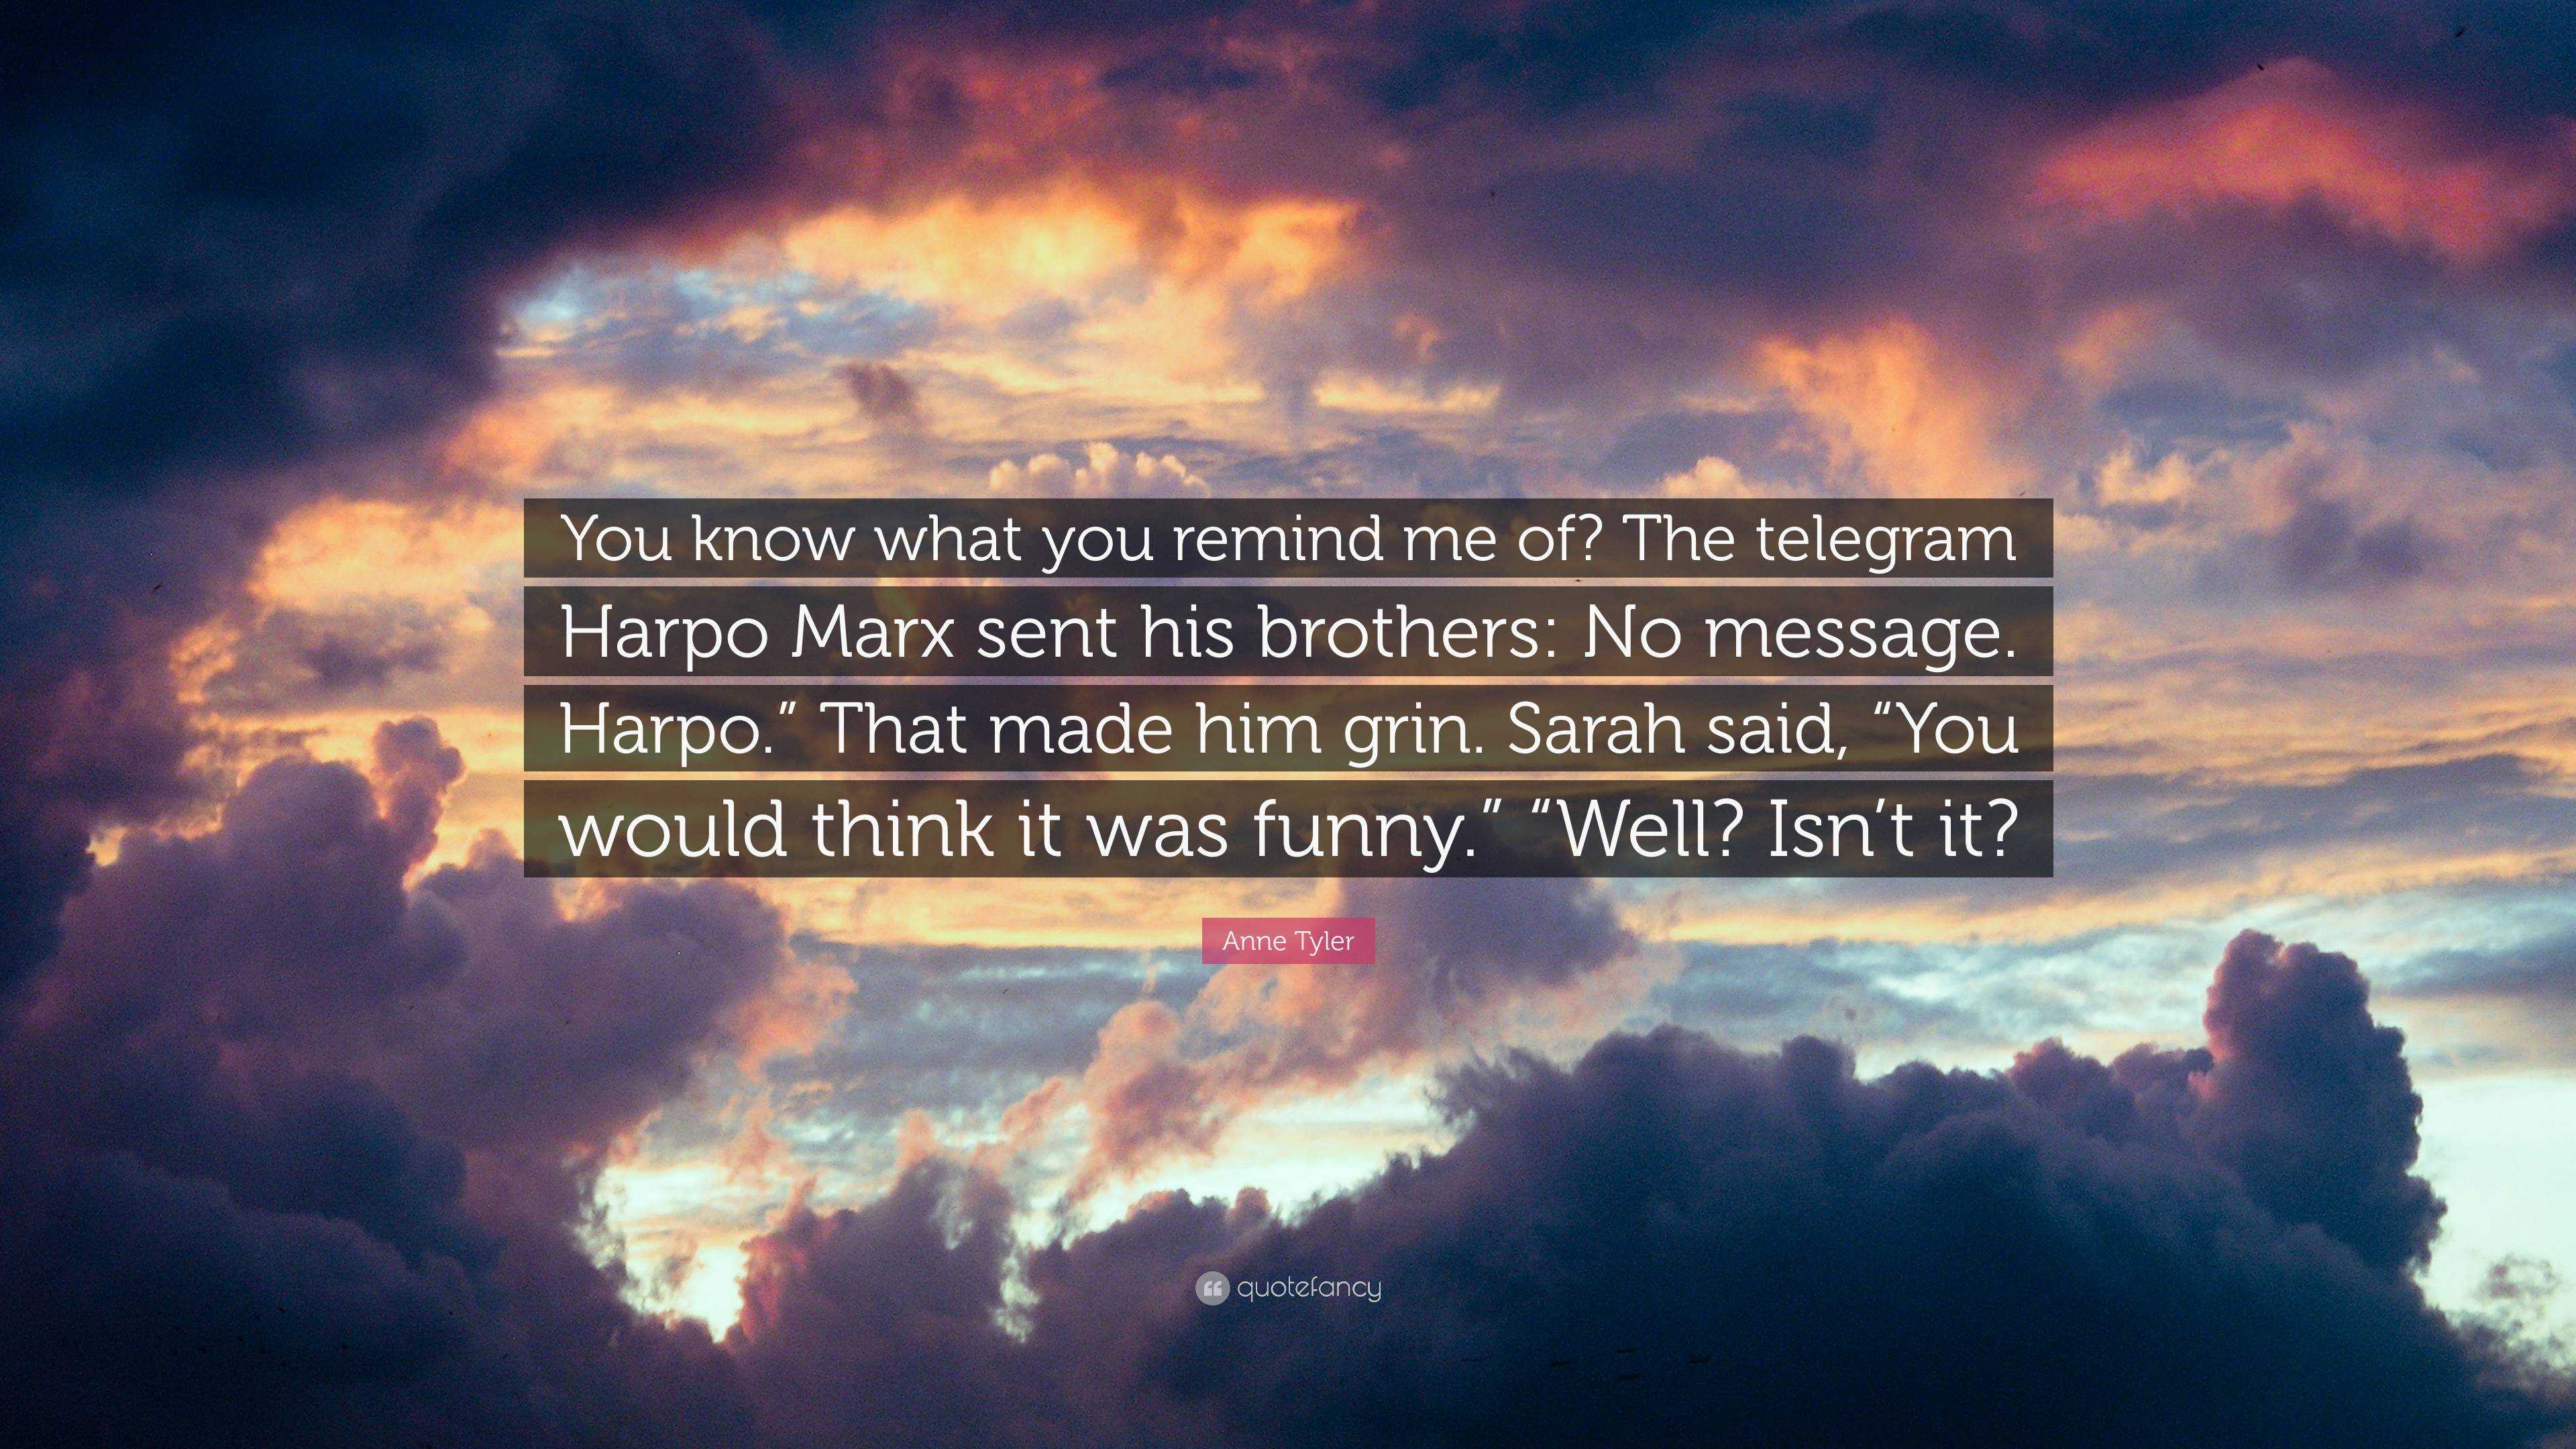 Anne Tyler Quote: “You know what you remind me of? The telegram Harpo Marx  sent his brothers: No message. Harpo.” That made him grin. Sarah...”